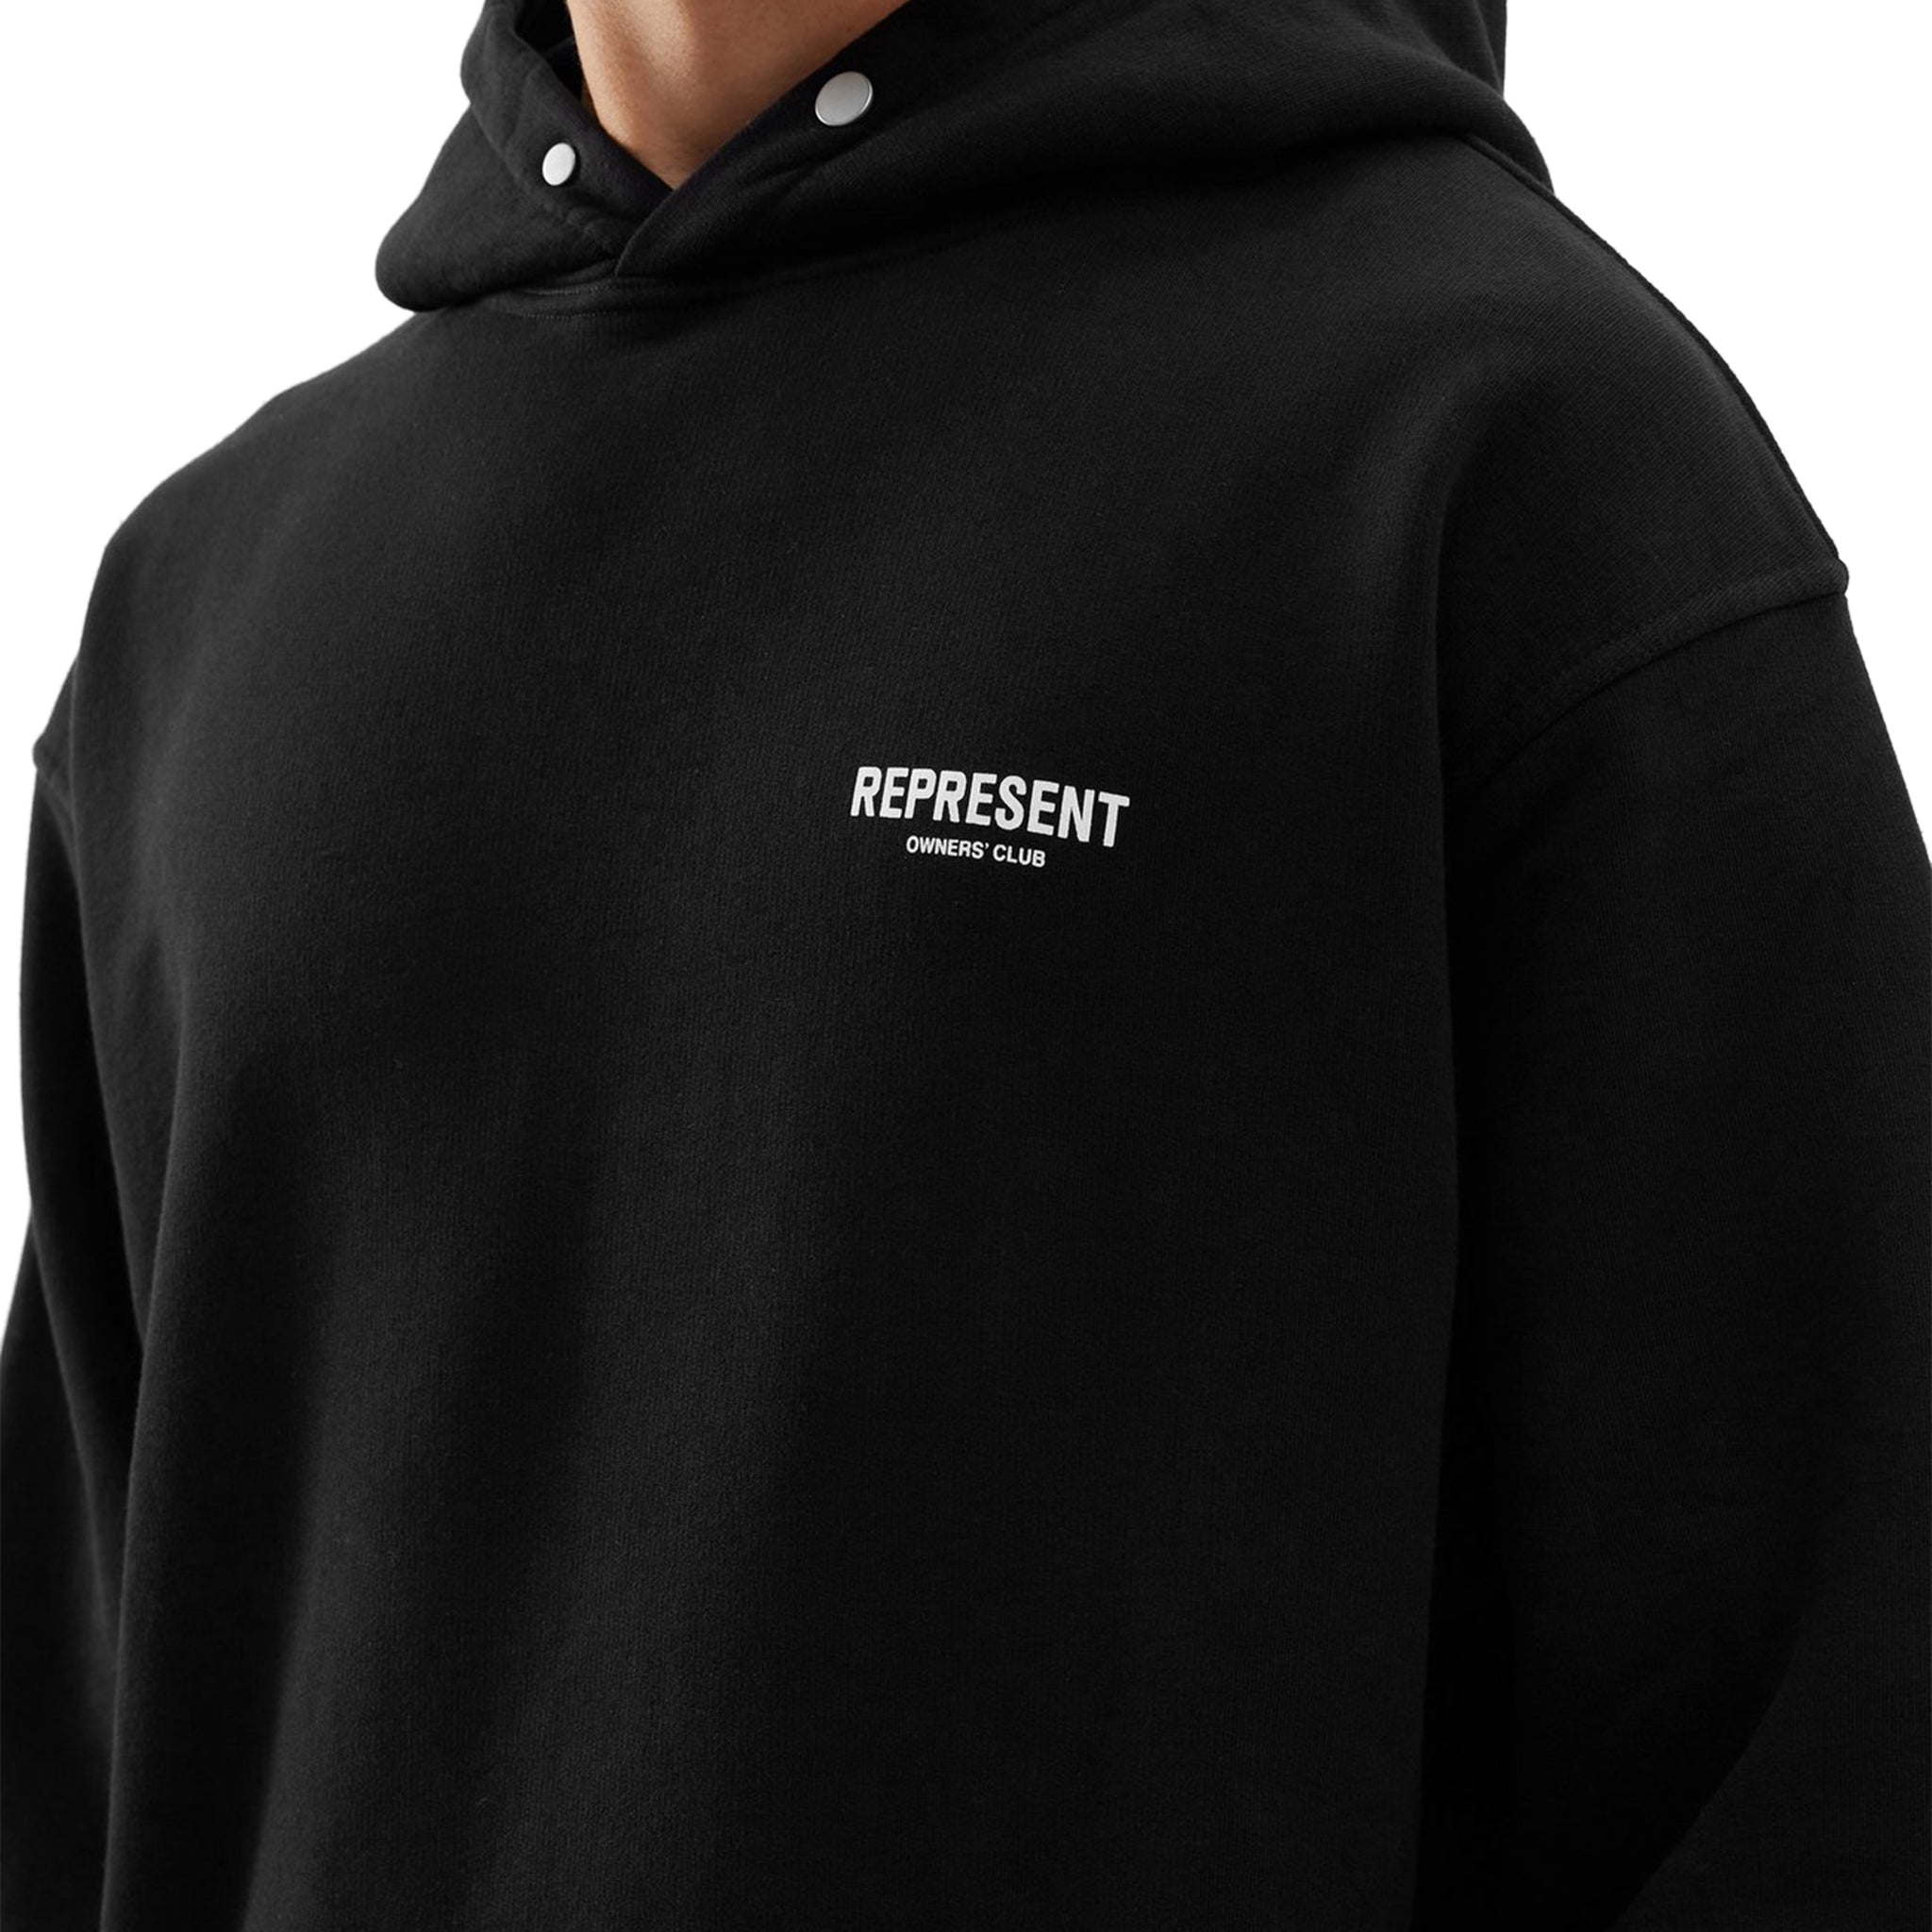 Model chest logo view of Represent Owners Club Black Hoodie M04153-01